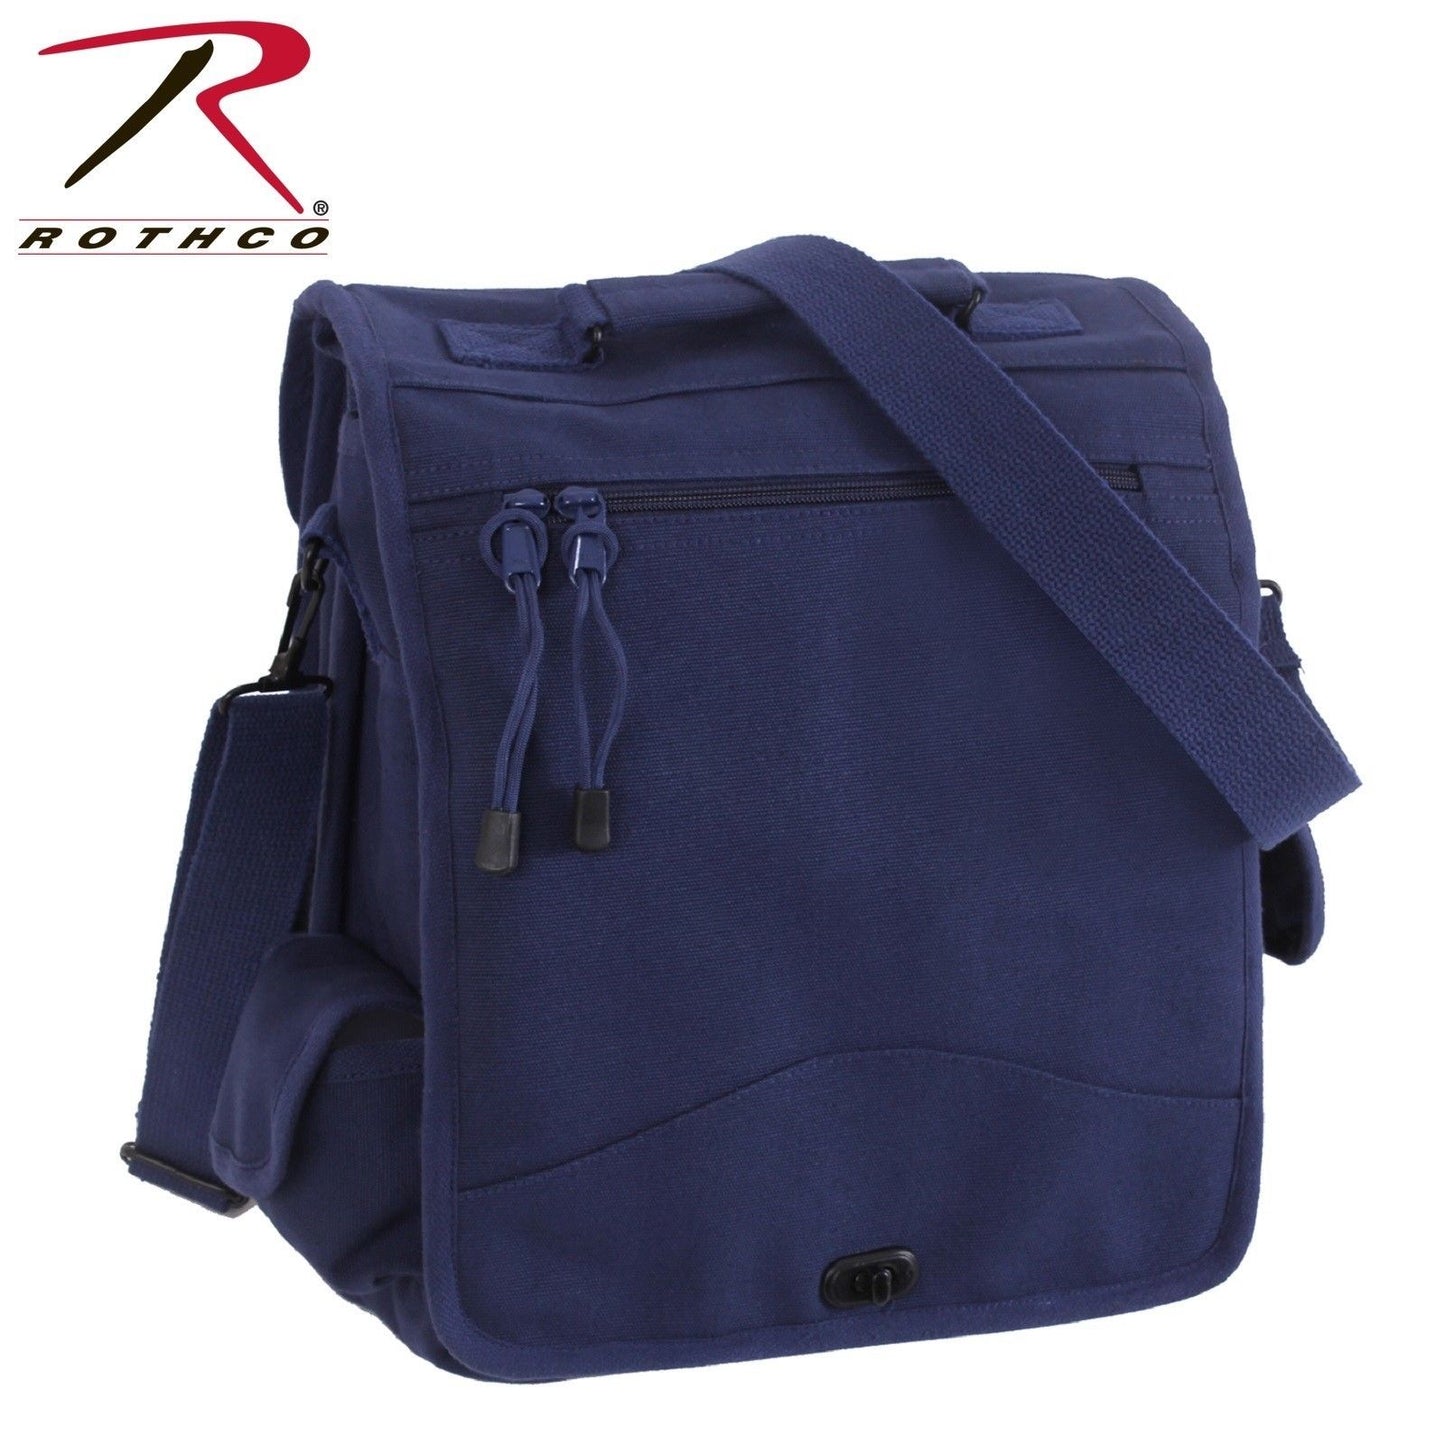 Rothco Canvas M-51 Engineers Field Bag - Navy Blue Professional Shoulder Bag